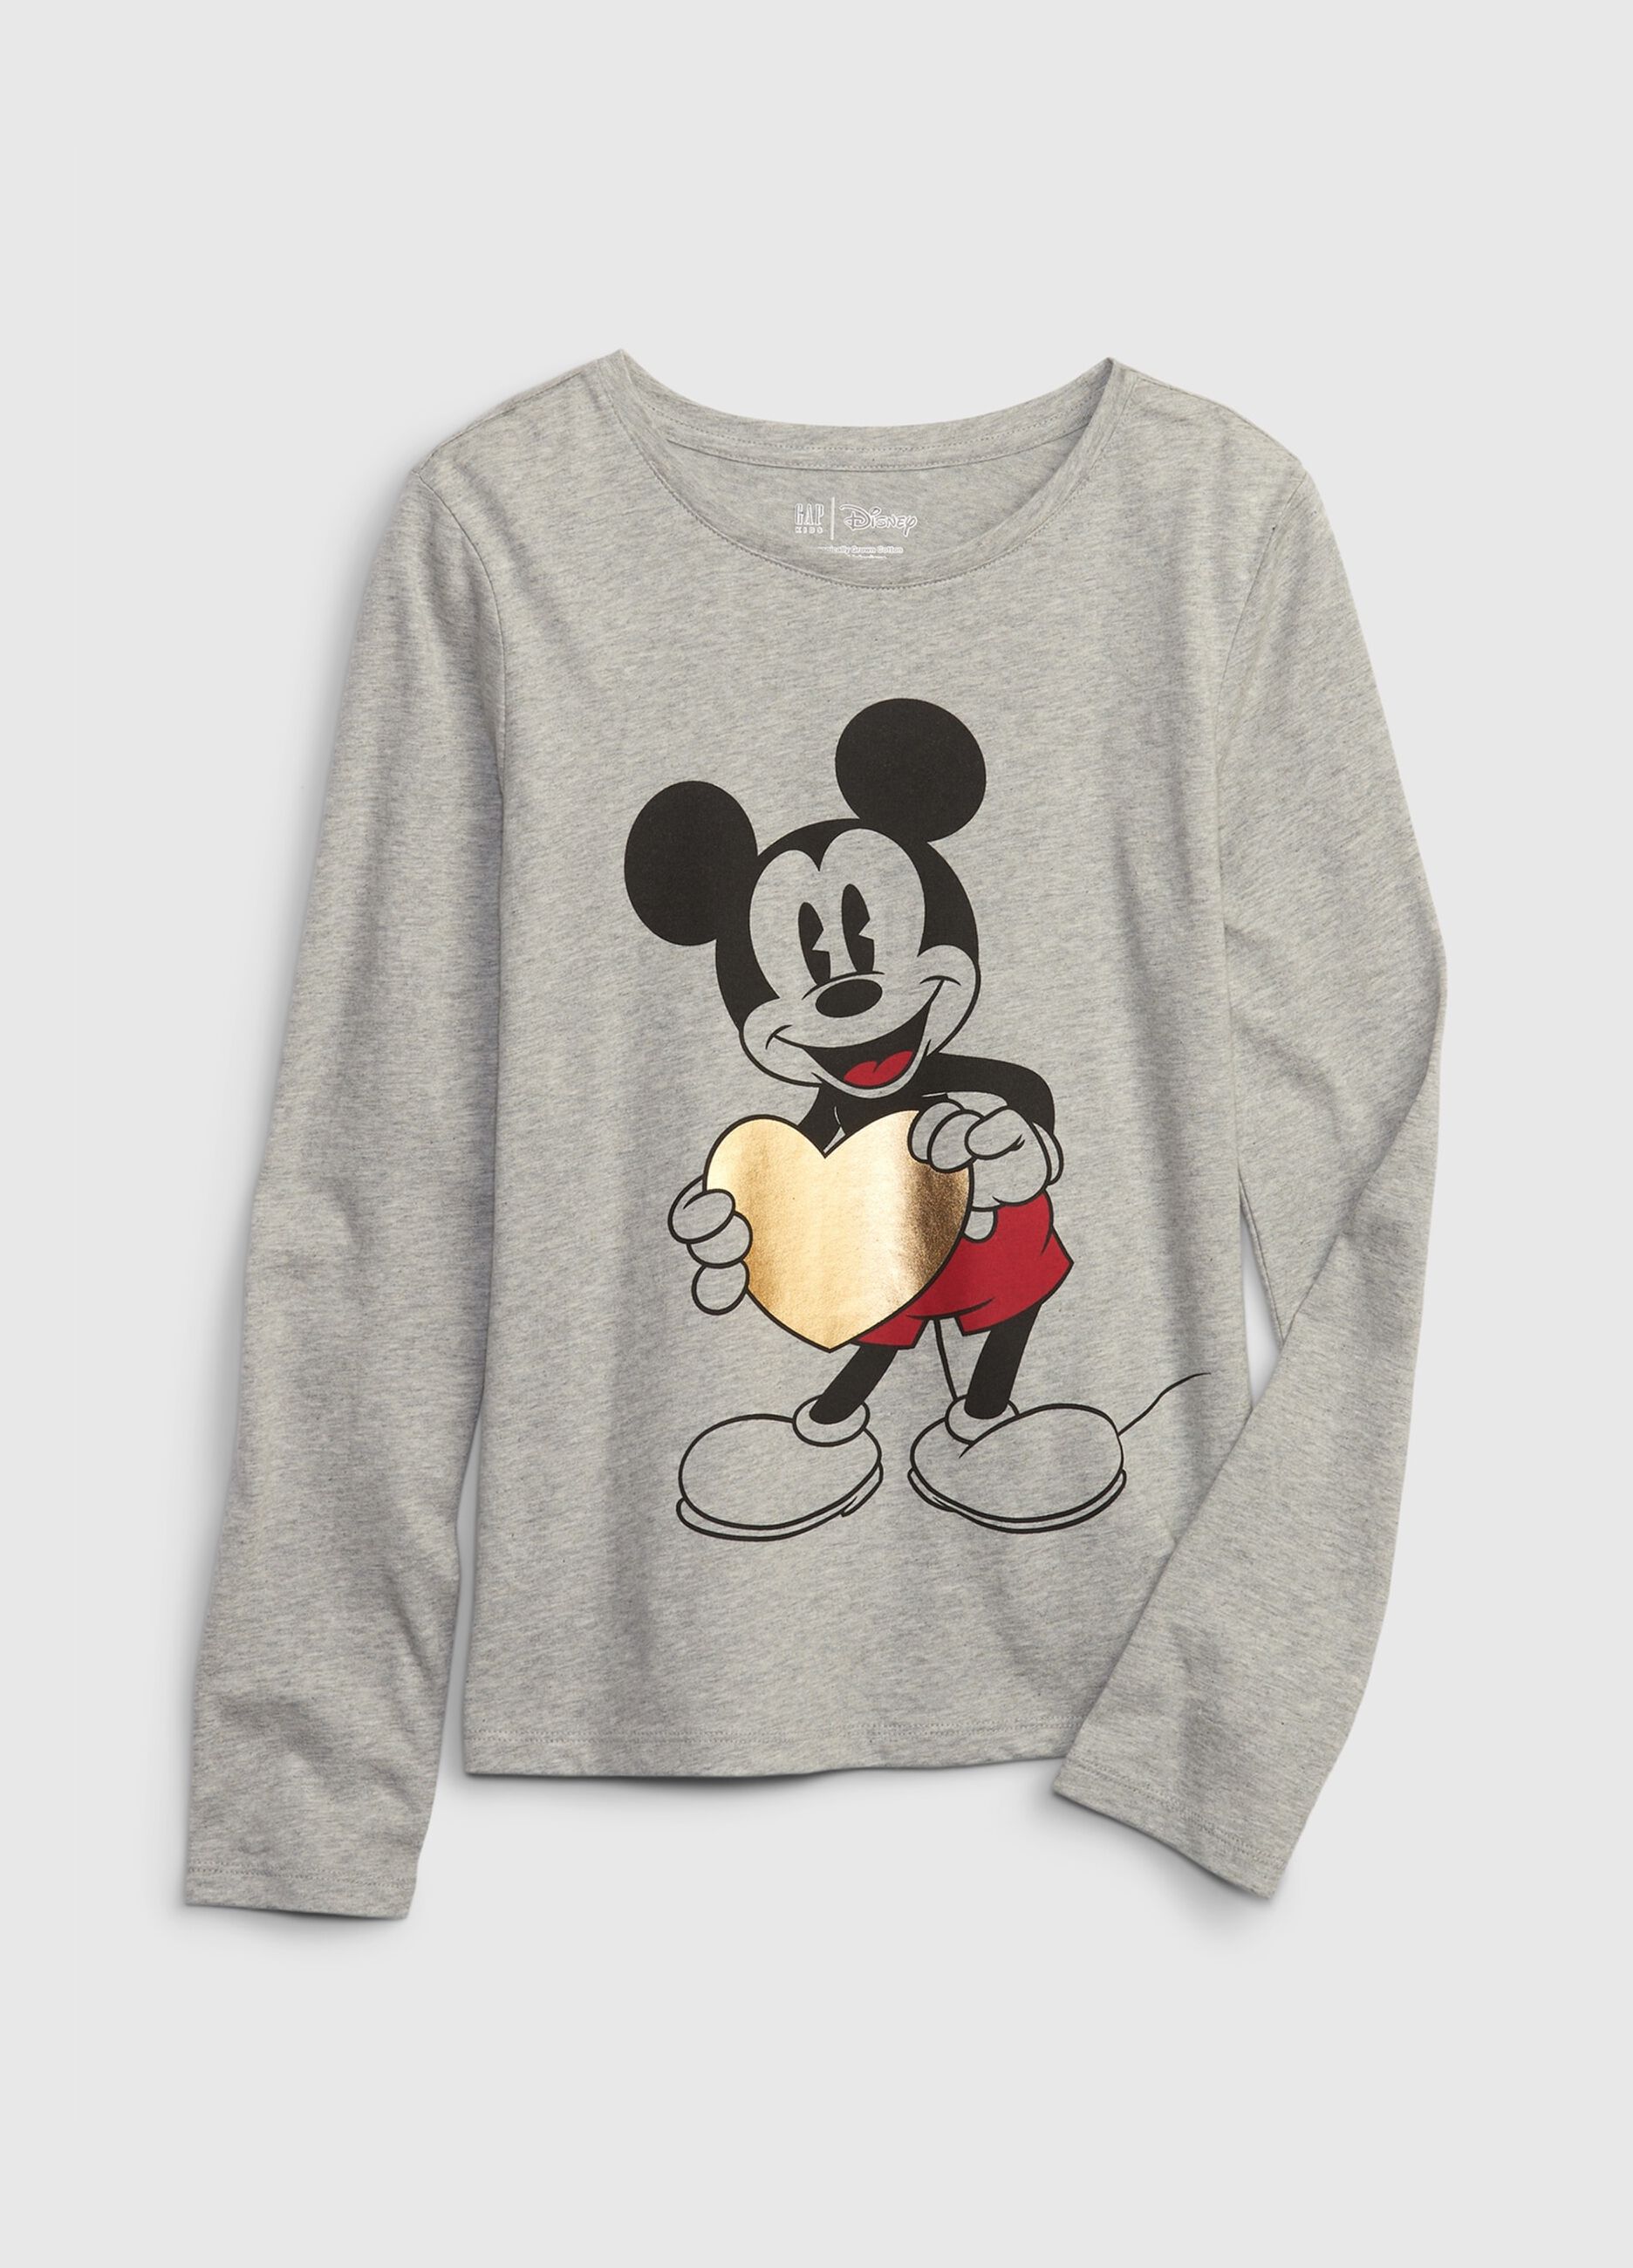 Long-sleeved T-shirt with Disney Mickey Mouse print